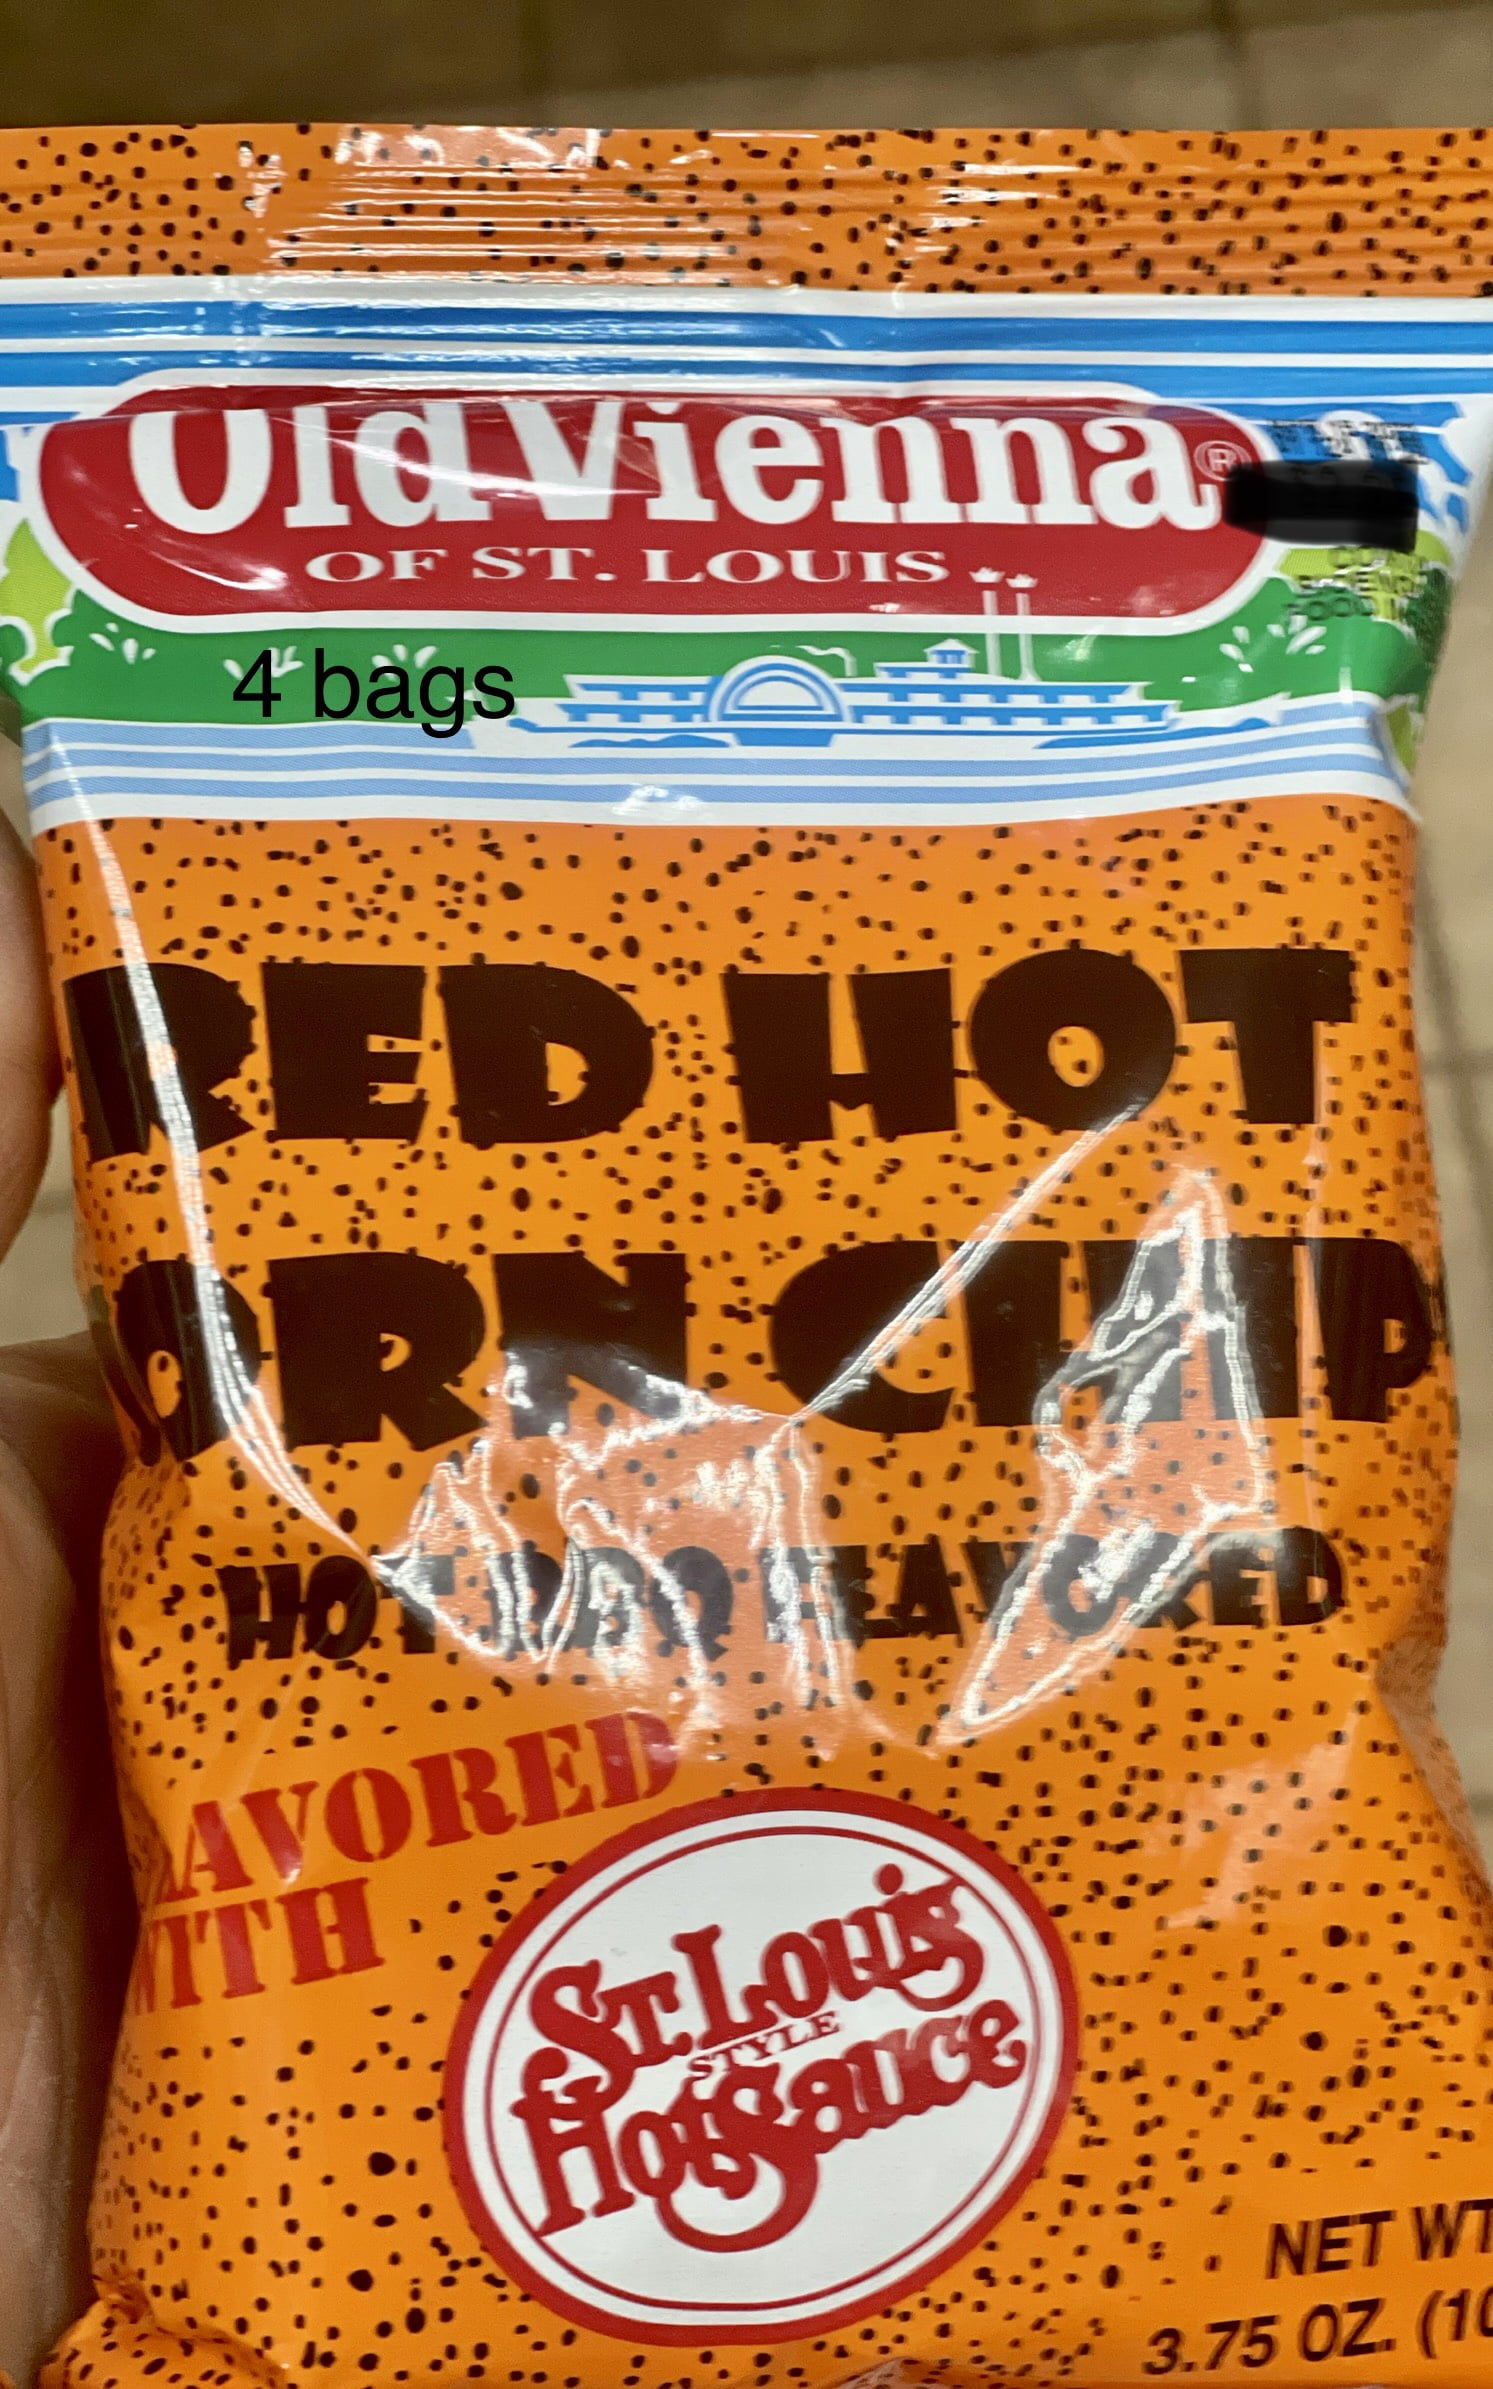 REVIEW: Old Vienna of St. Louis – Cheesy Red Hot Riplets